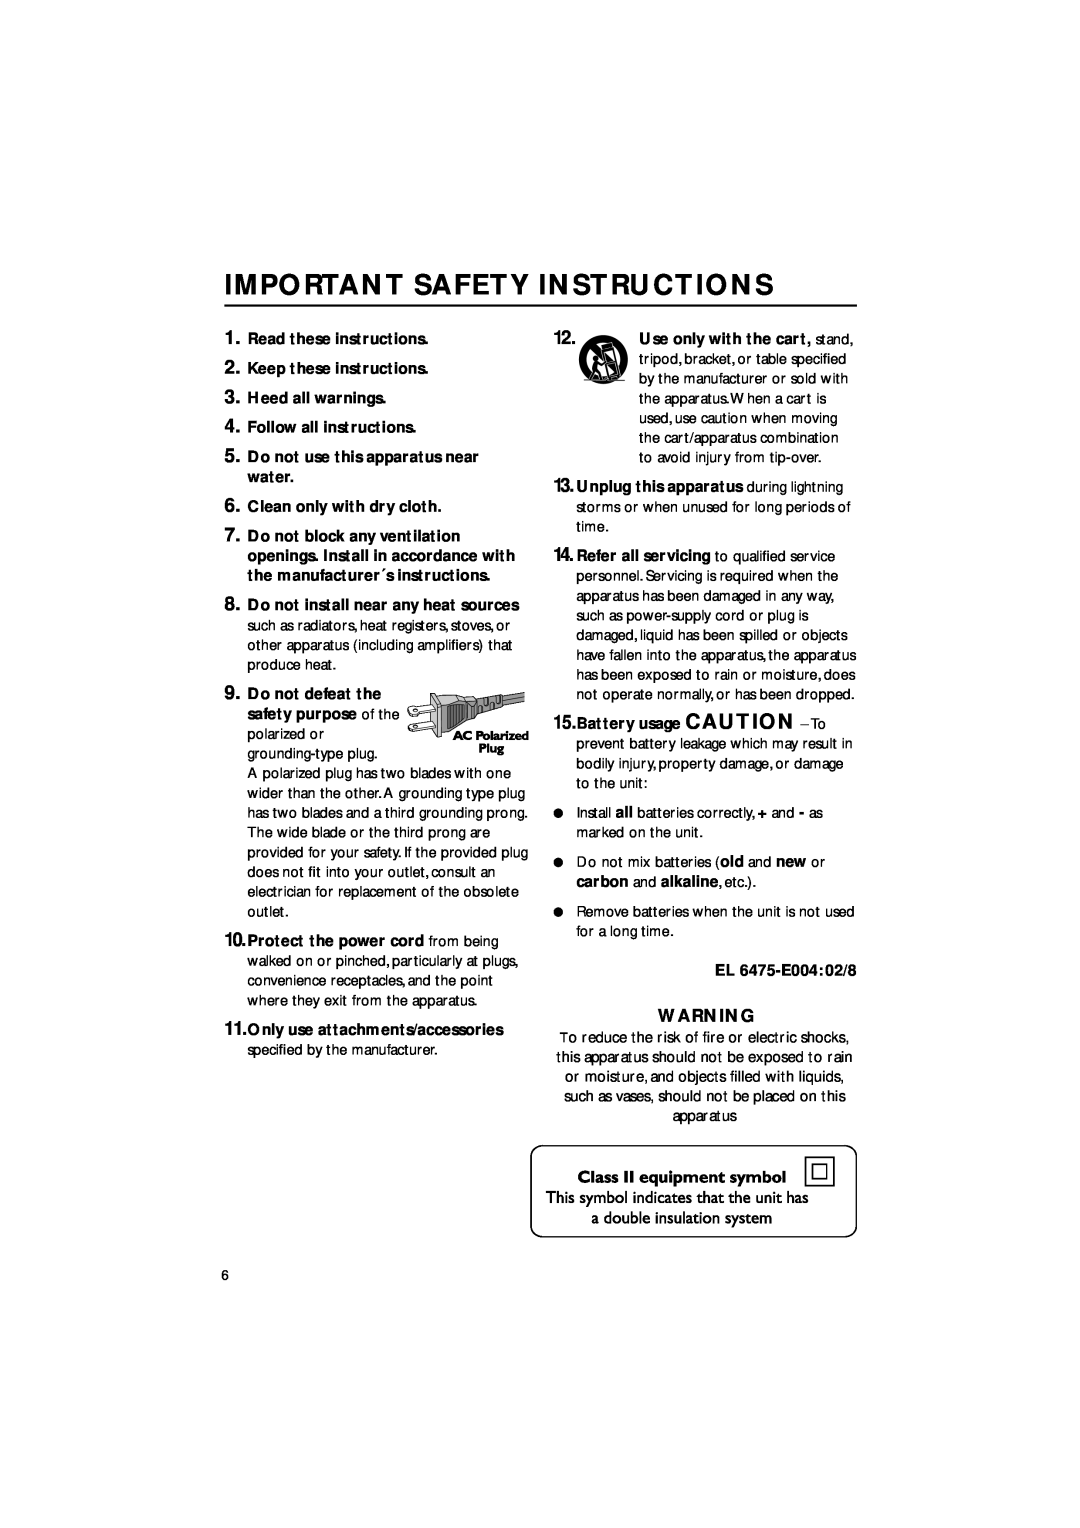 Philips MME-100 warranty Important Safety Instructions 